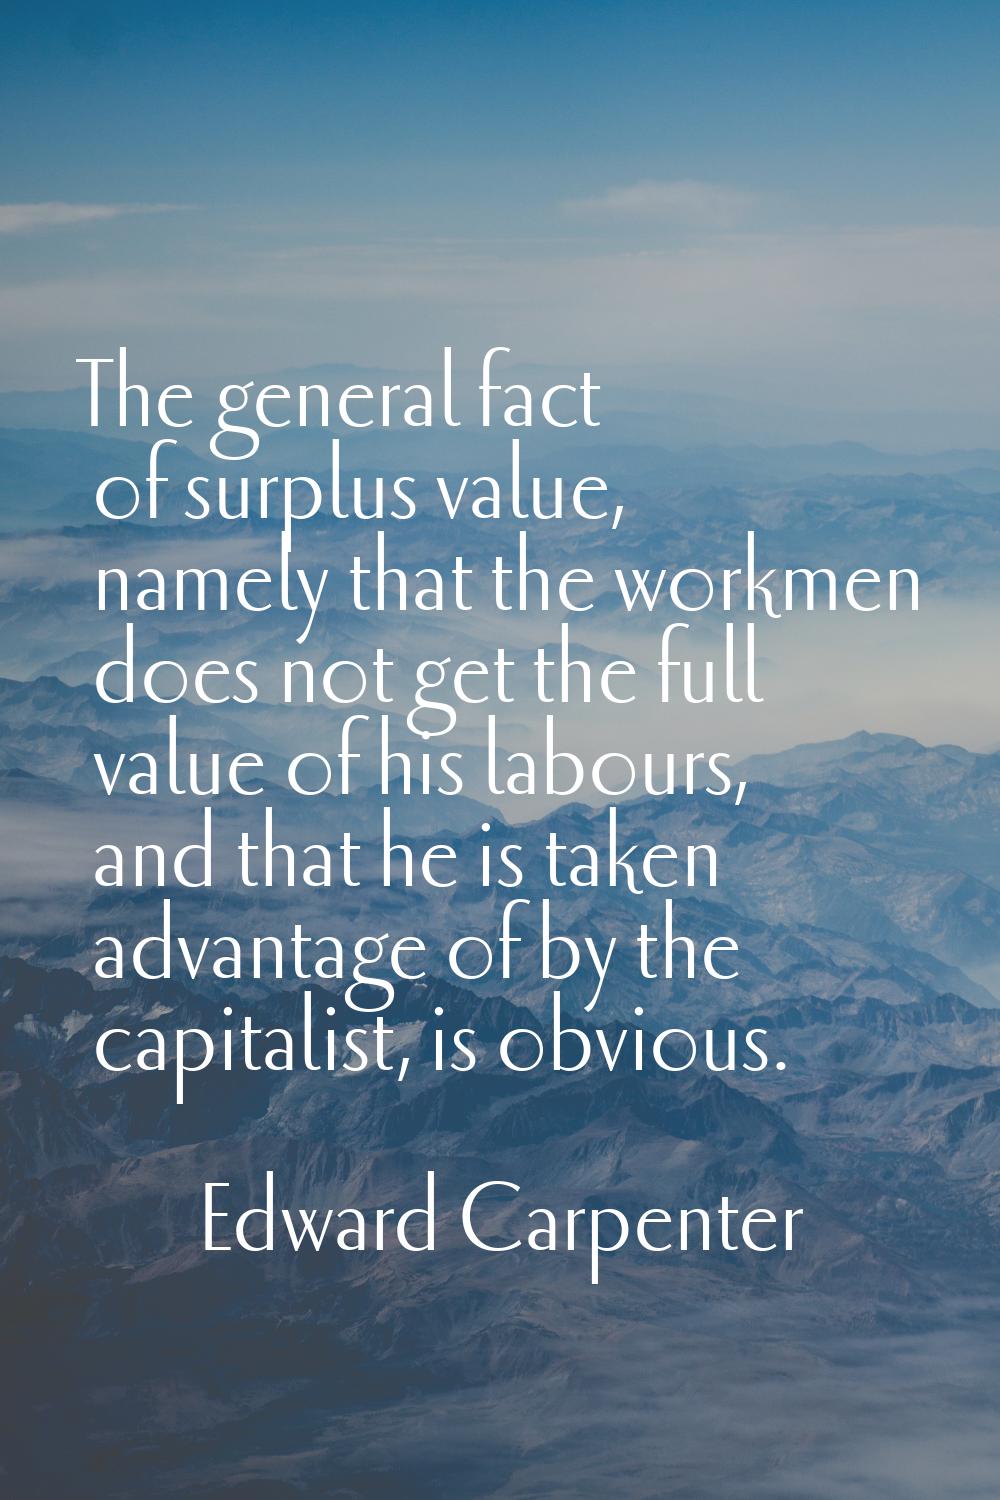 The general fact of surplus value, namely that the workmen does not get the full value of his labou